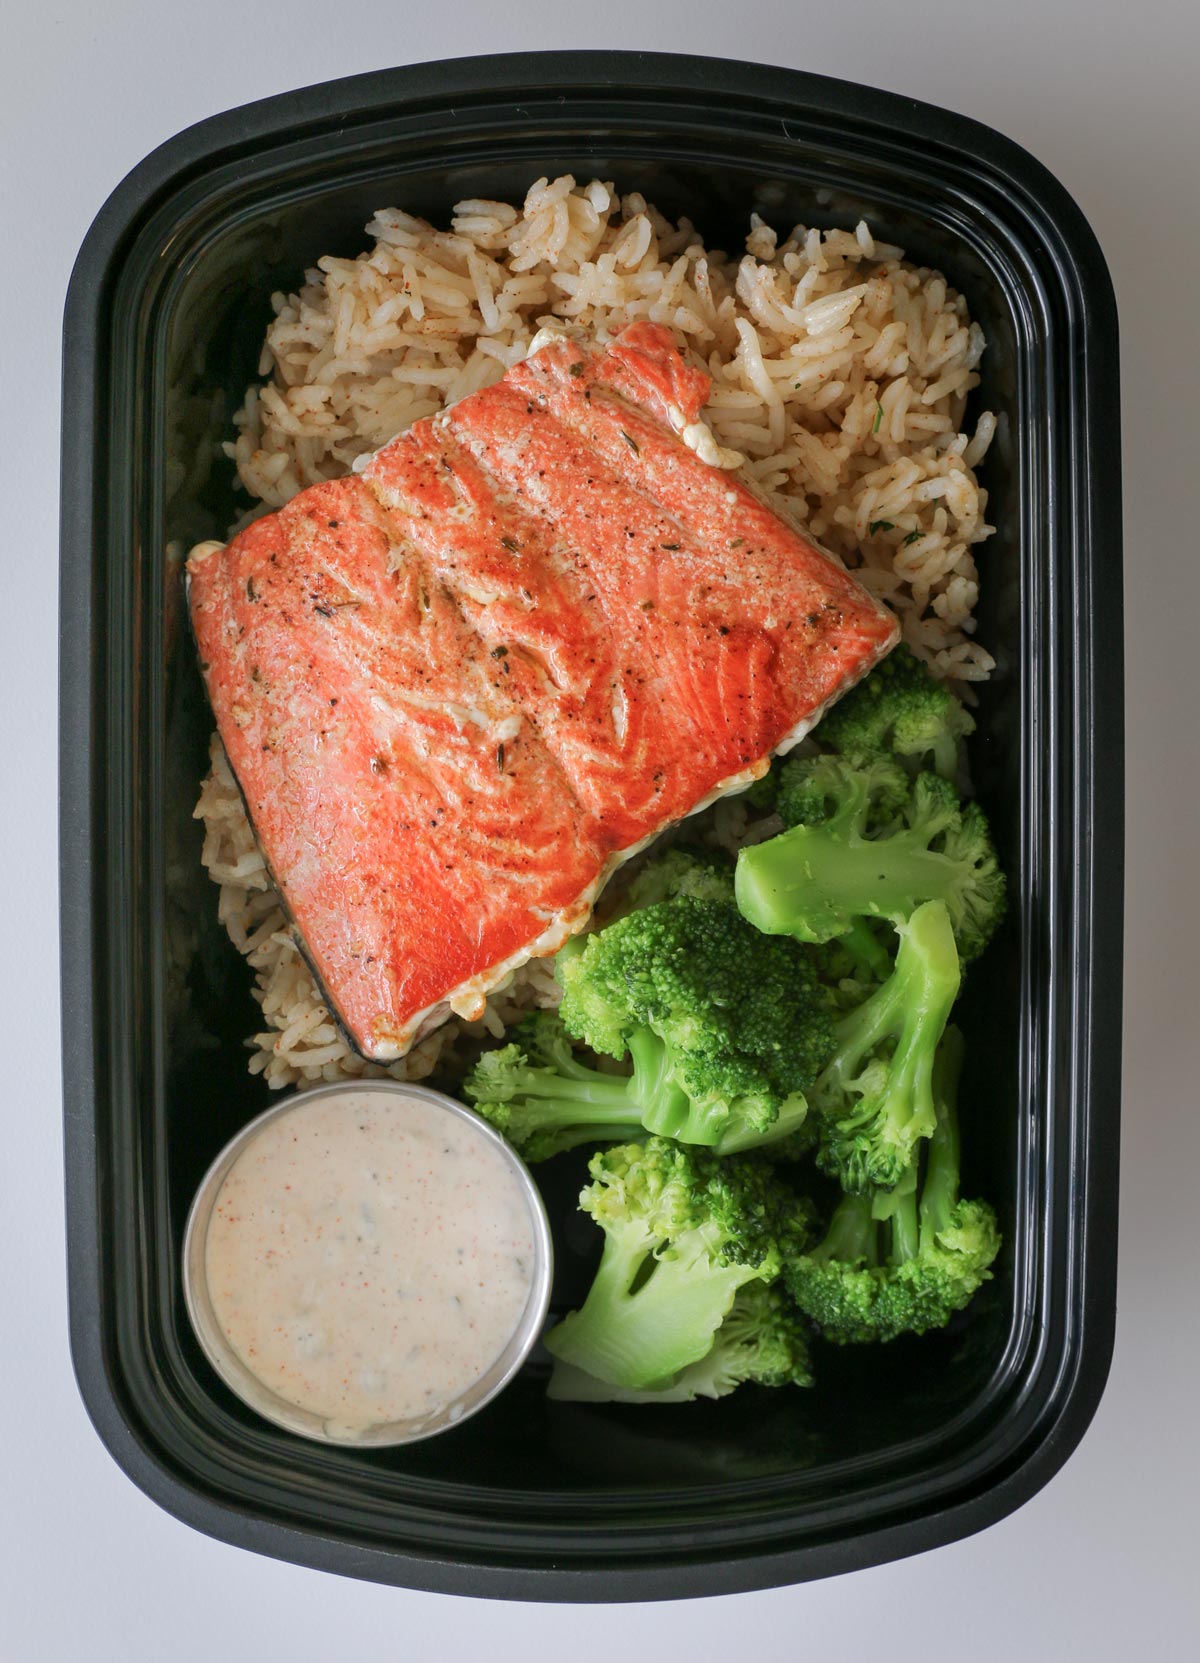 meal prepped salmon box with rice, broccoli, salmon fillet, and tartar sauce.